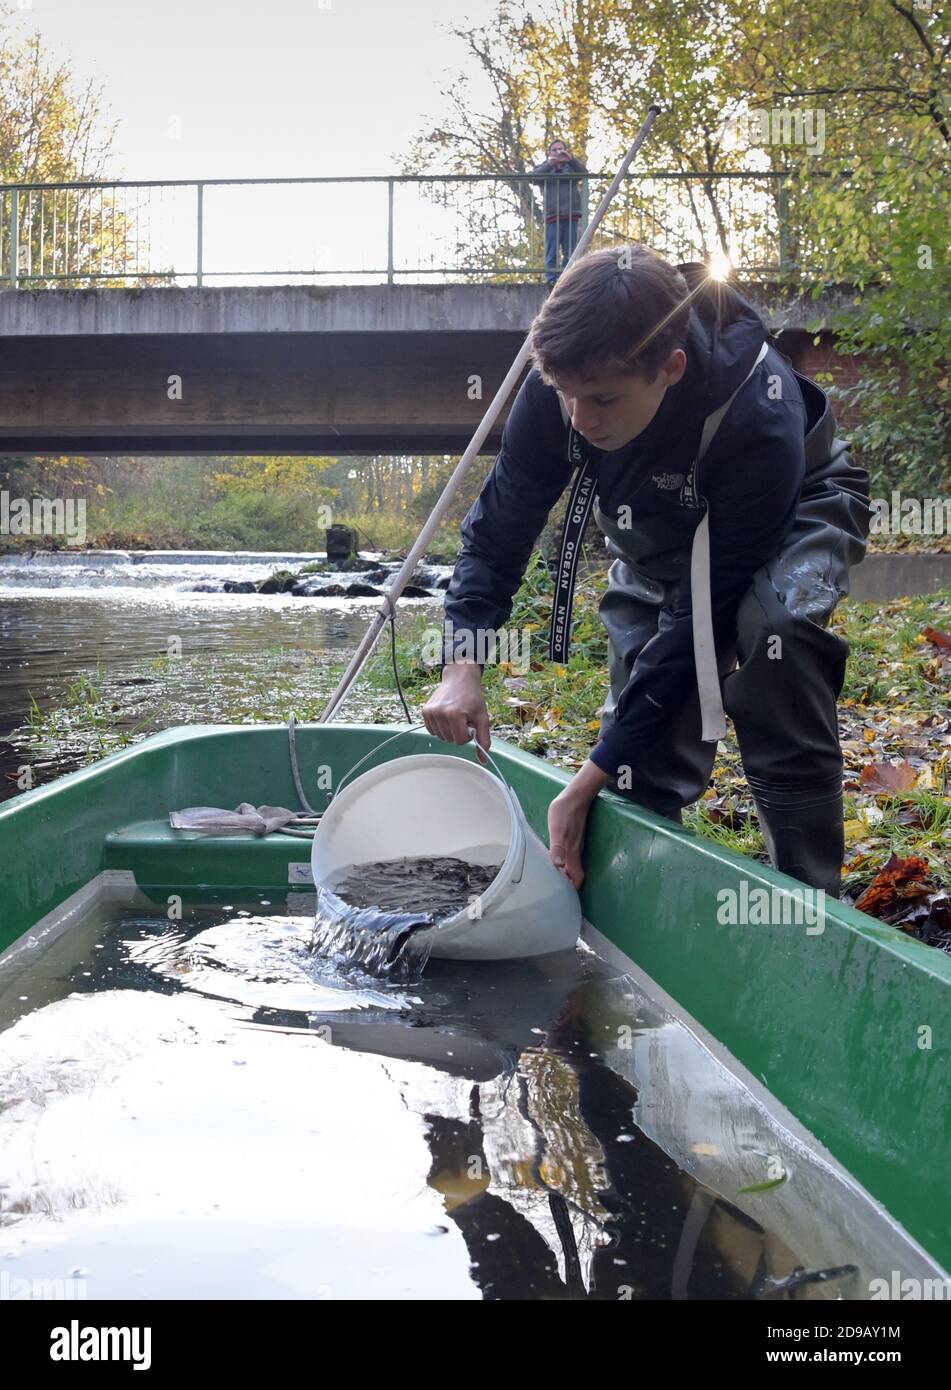 04 November 2020, Brandenburg, Uckerland/Ot Wolfshagen: Jannis Renke, who works at the Institute for Inland Fisheries in Potsdam-Sacrow (IFB), who is completing a voluntary ecological year, places young salmon of about six to ten centimetres in length from a plastic bucket into a barge. The boat then headed towards Klein Linde, where the fish were released in the Stepenitz. In total, around 50,000 six-month-old salmon bred in Denmark for Brandenburg were released in the river's catchment area. The fish are released in autumn to get used to the water, feed here on small crabs and insect larvae, Stock Photo